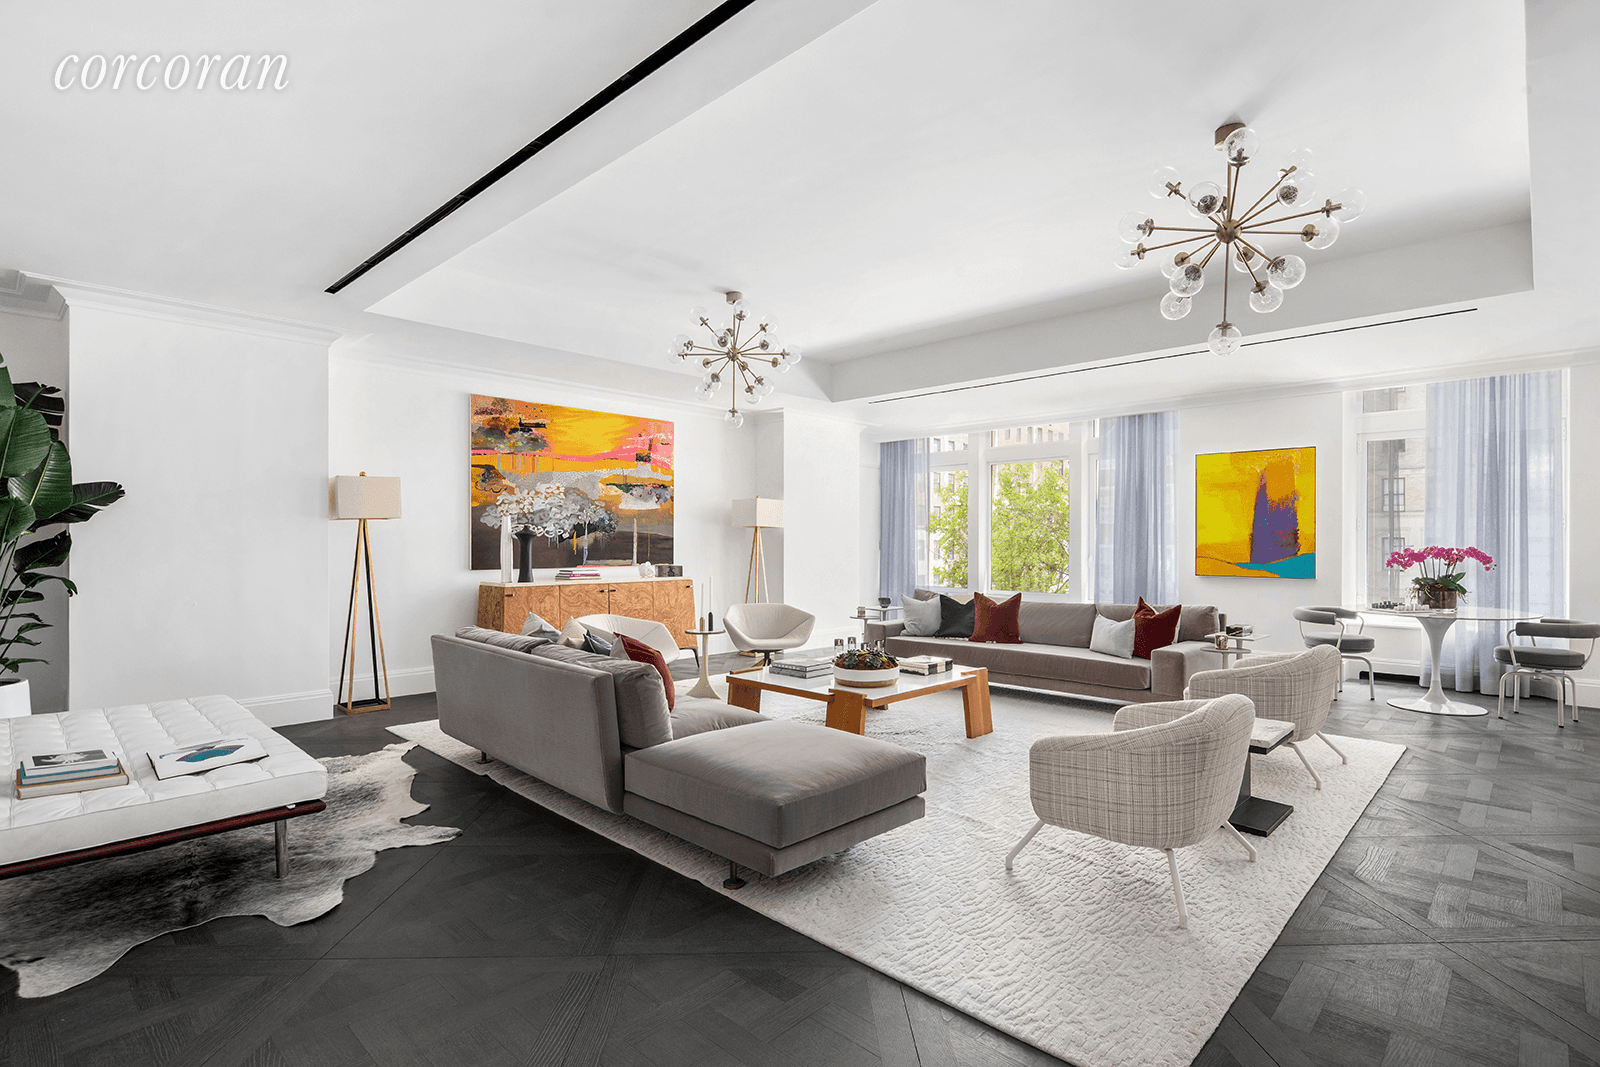 IMMEDIATE OCCUPANCY. 1010 Park Avenue, Terrace Duplex is a rare jewel offering grand scale and sophisticated modern luxury.